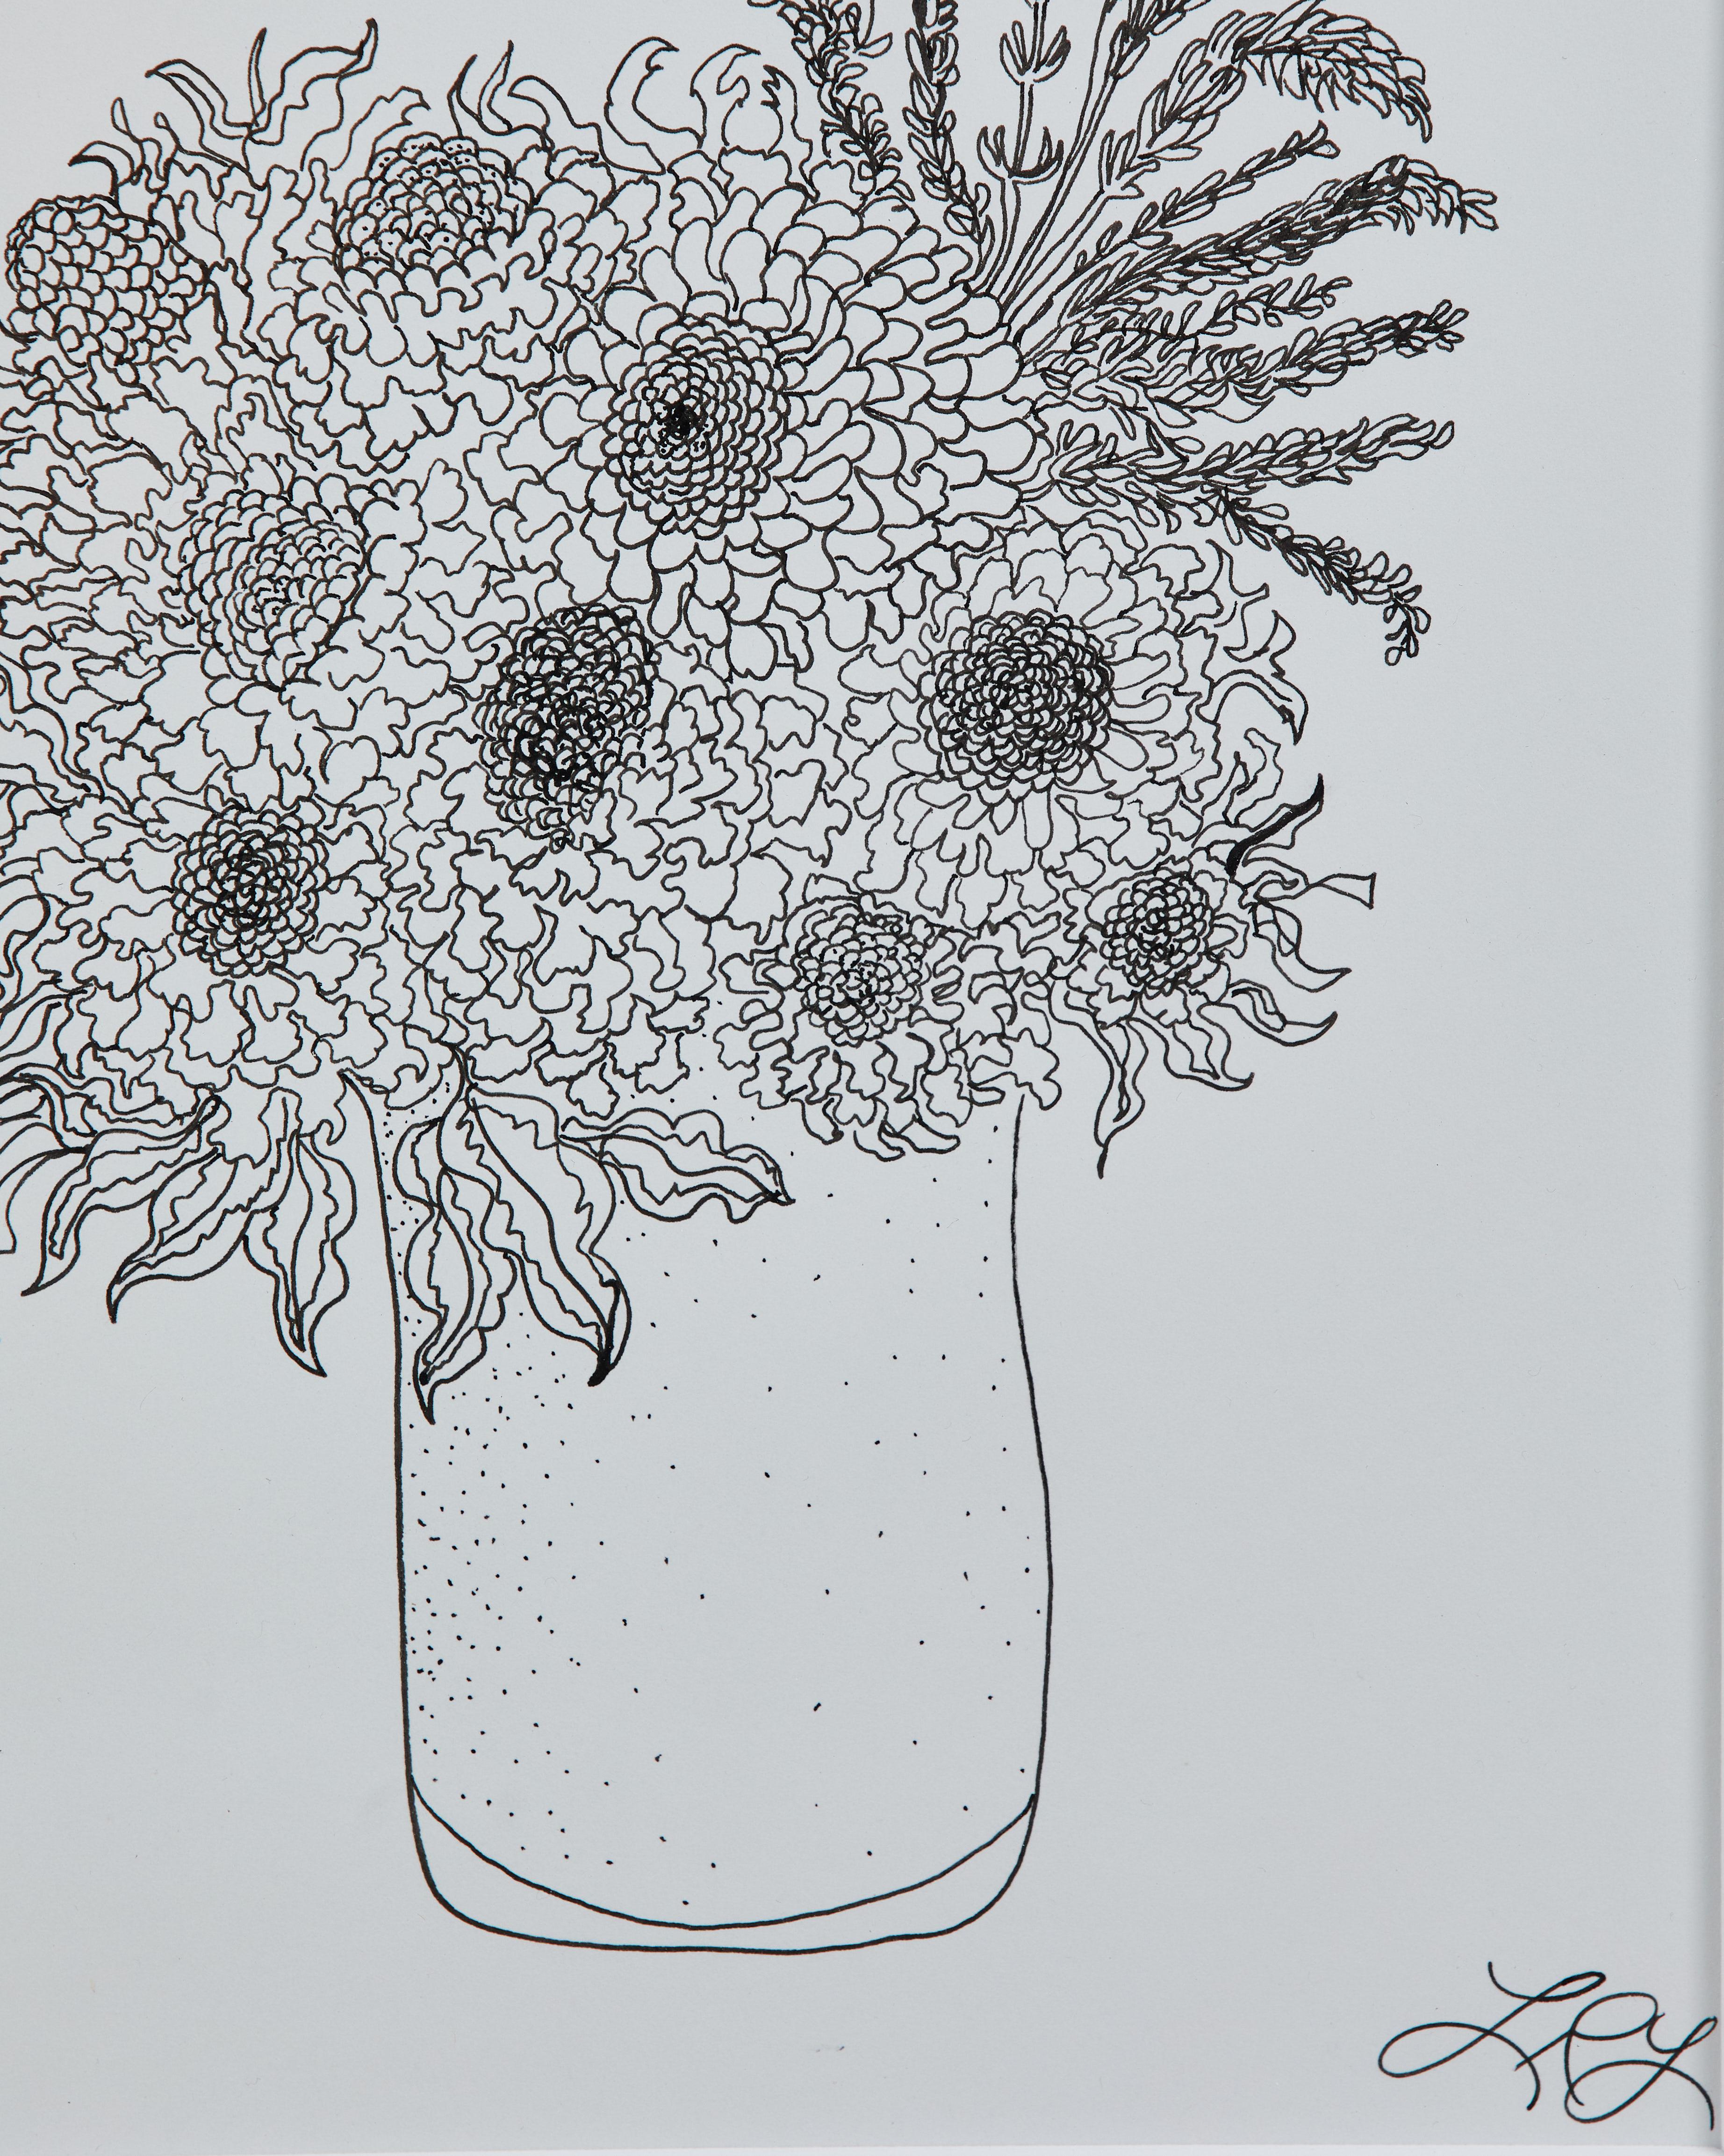 Liz Young, Still Life of Flowers in a Vase, Ink on Paper 1